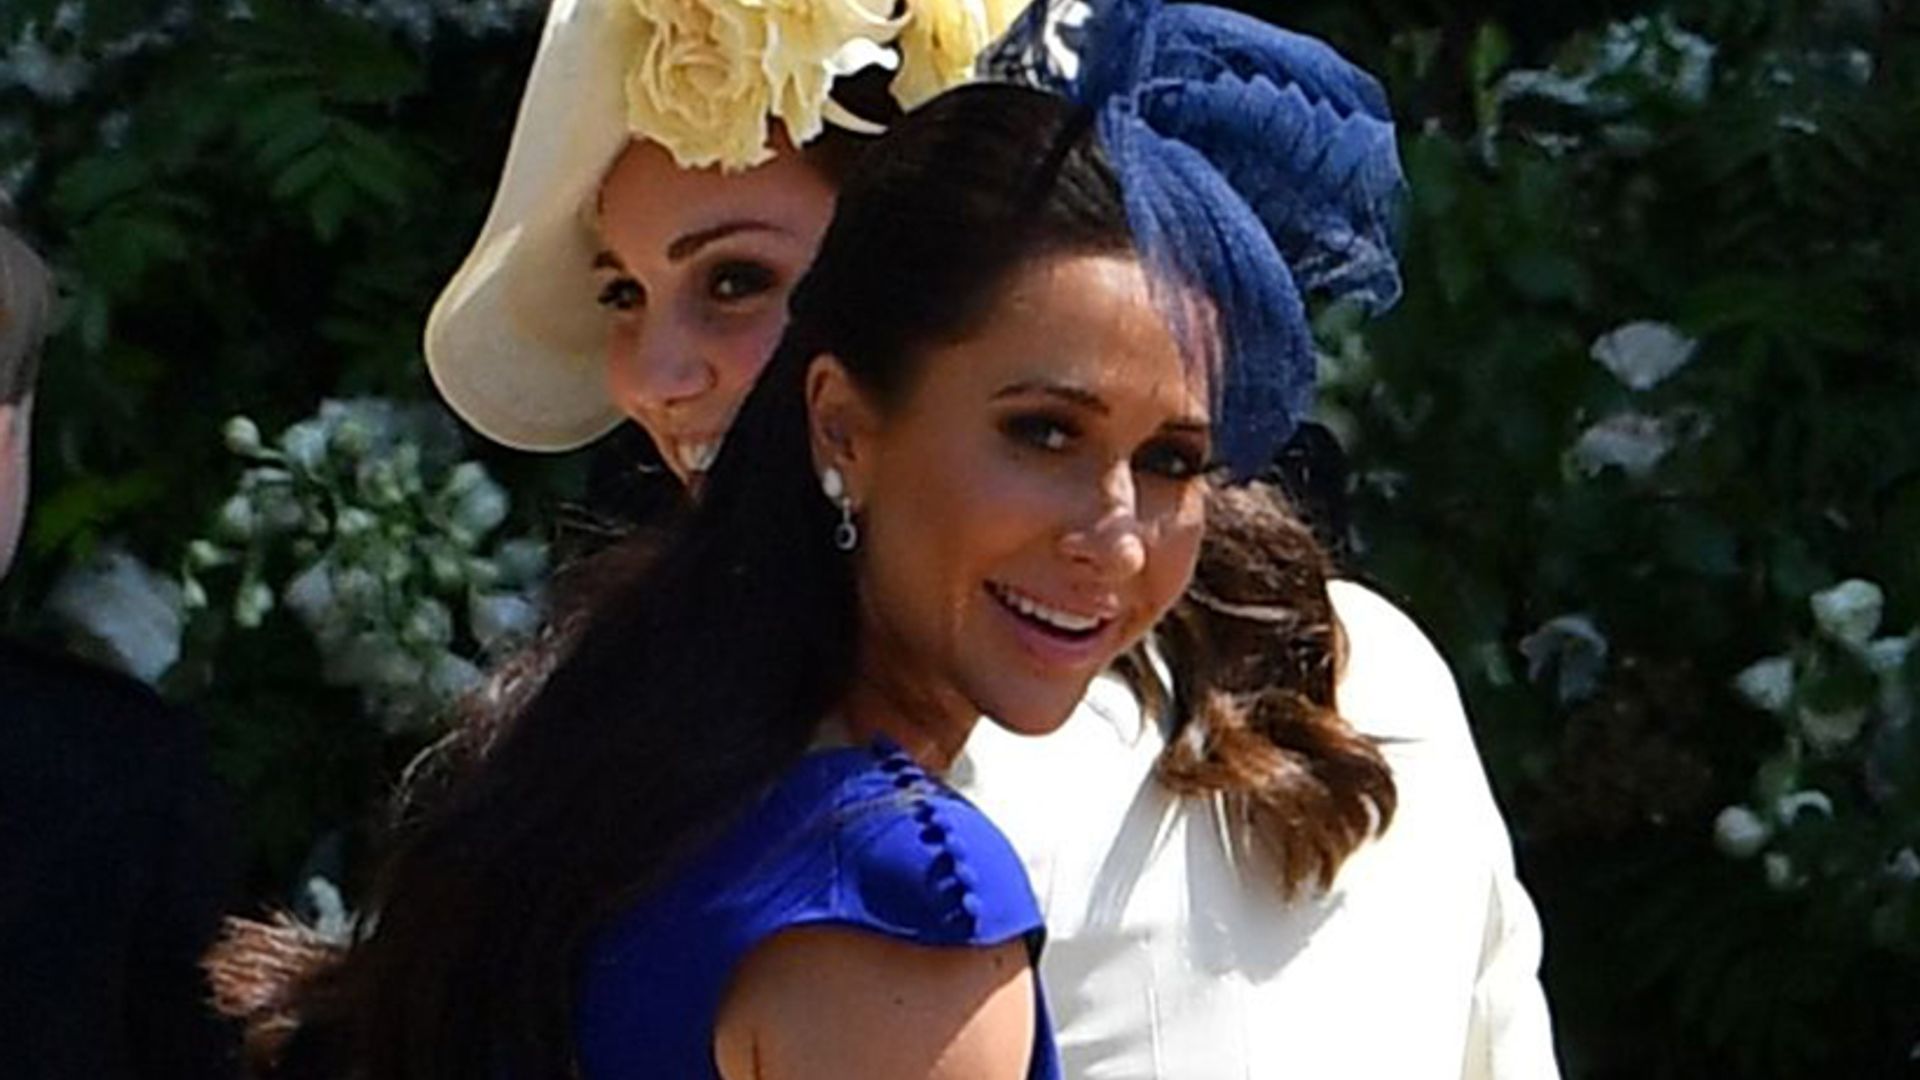 Hurry! Jessica Mulroney’s royal wedding guest dress is now on sale